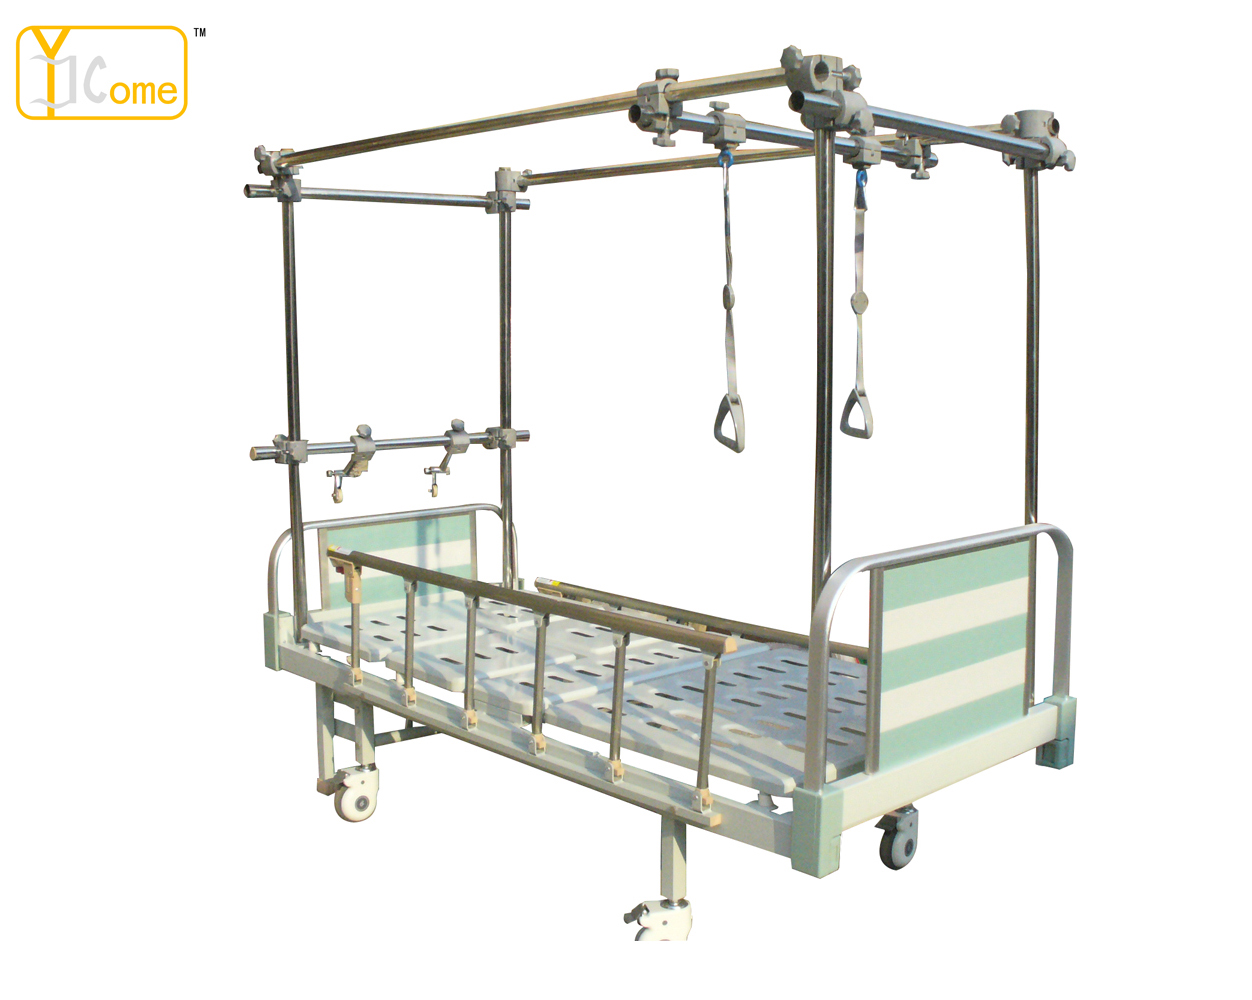  Orthopaedic Traction Bed